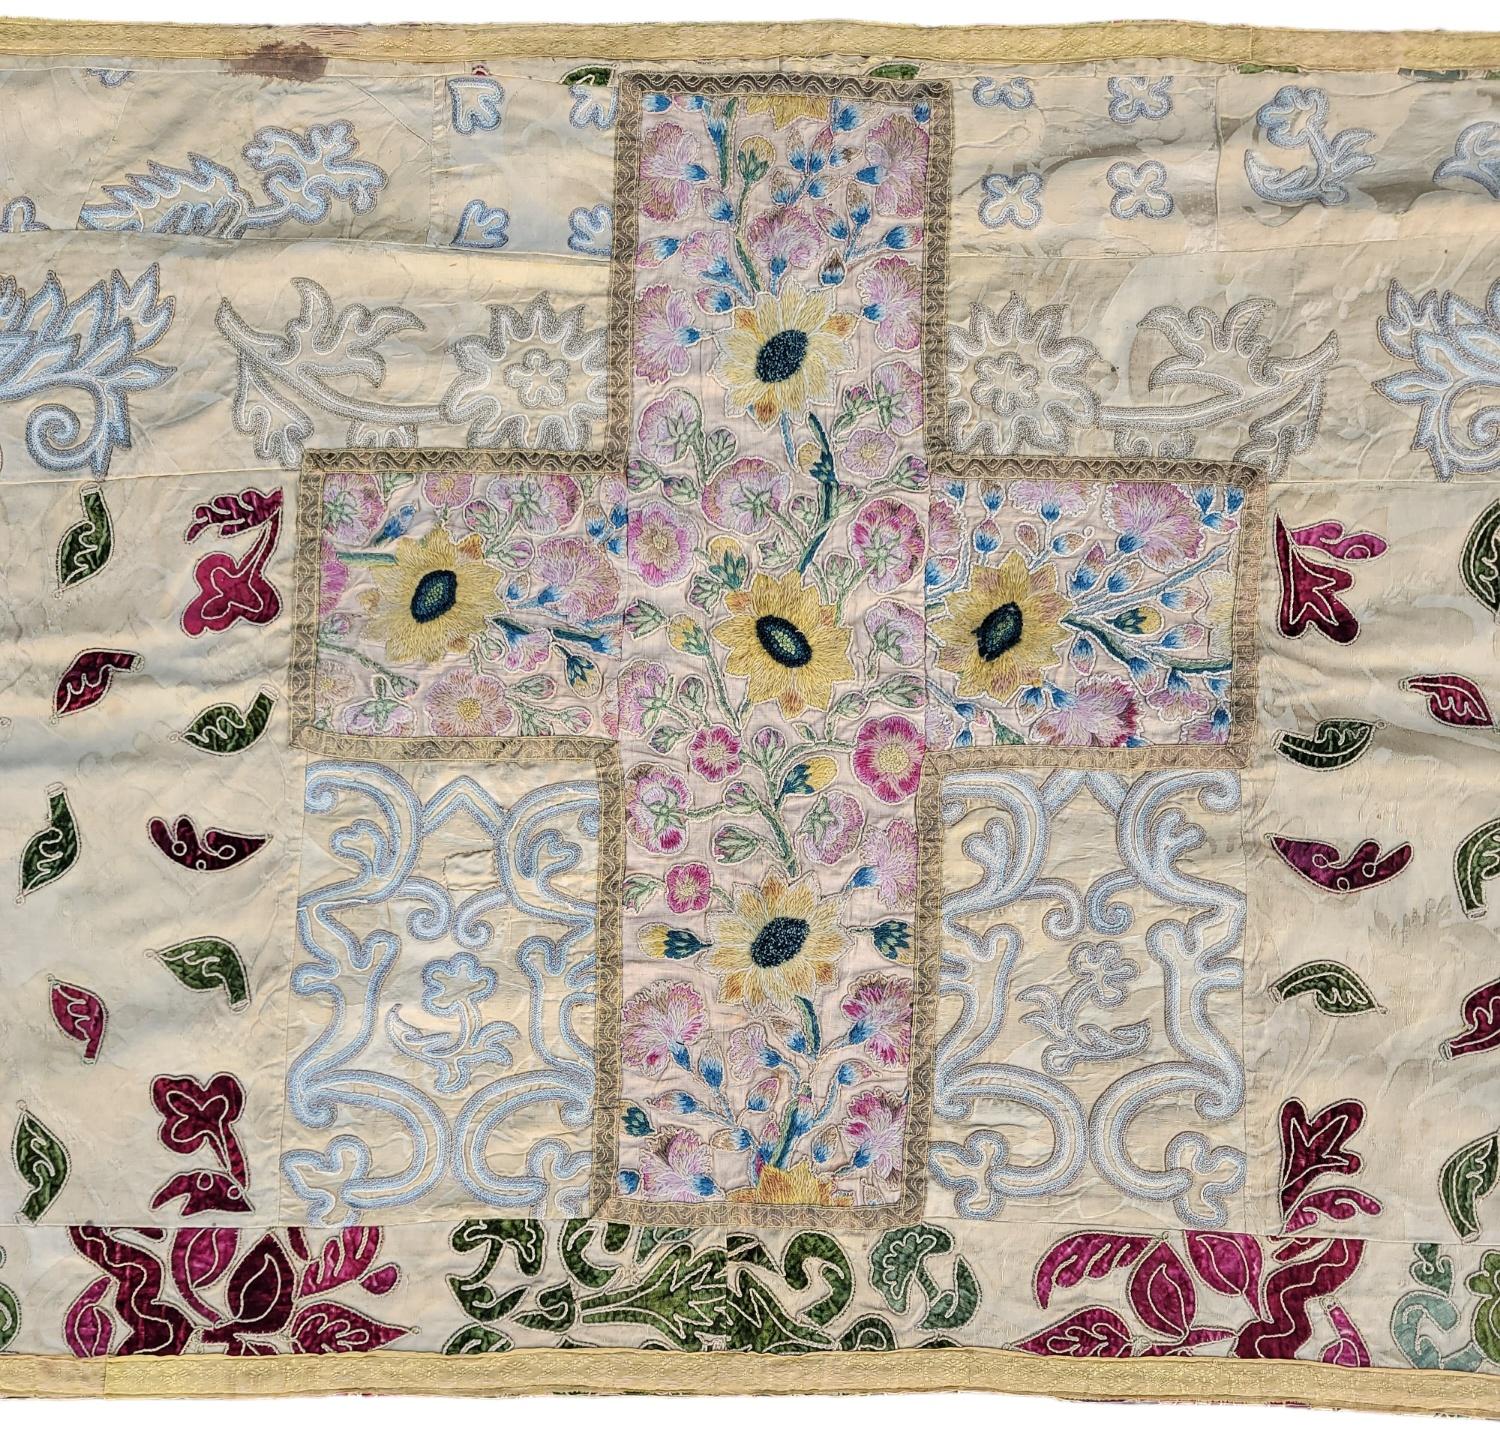 Italian Hand Made Applique Alter Cloth Over Linen. The cross is sewn in the middle of the cloth. The flowers around and in between the cloth are all sewn in. The edges have wear from age and use. The linen backing has wear from age and use. Measures